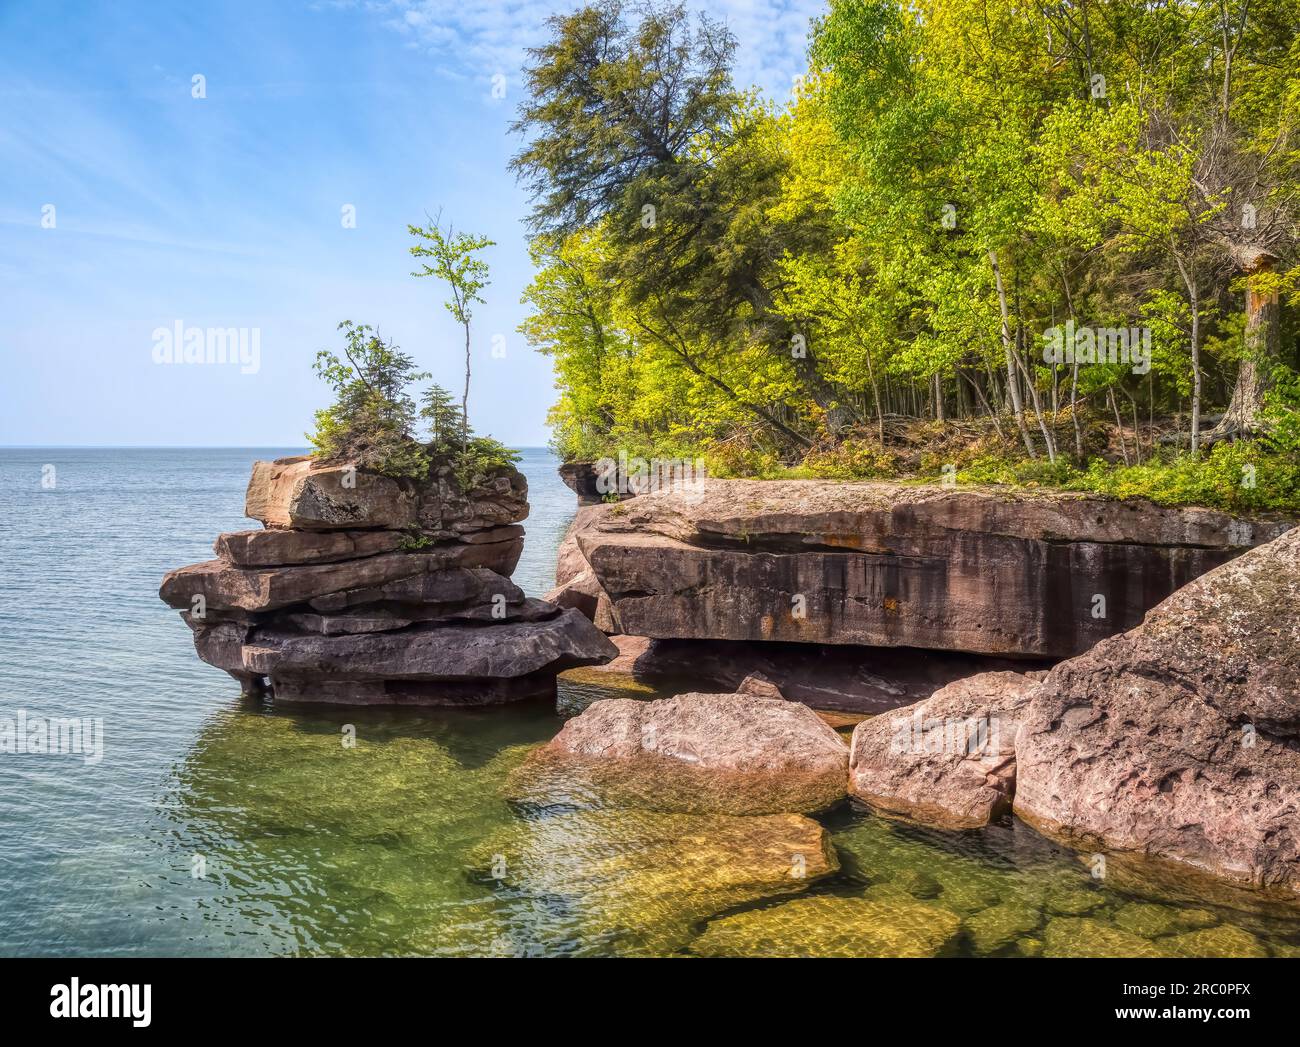 Rocky coastline of Lake Superior in Big Bay State Park in La Pointe on Madeline Island in the Apostle Islands National Lakeshore in Wisconsin USA Stock Photo